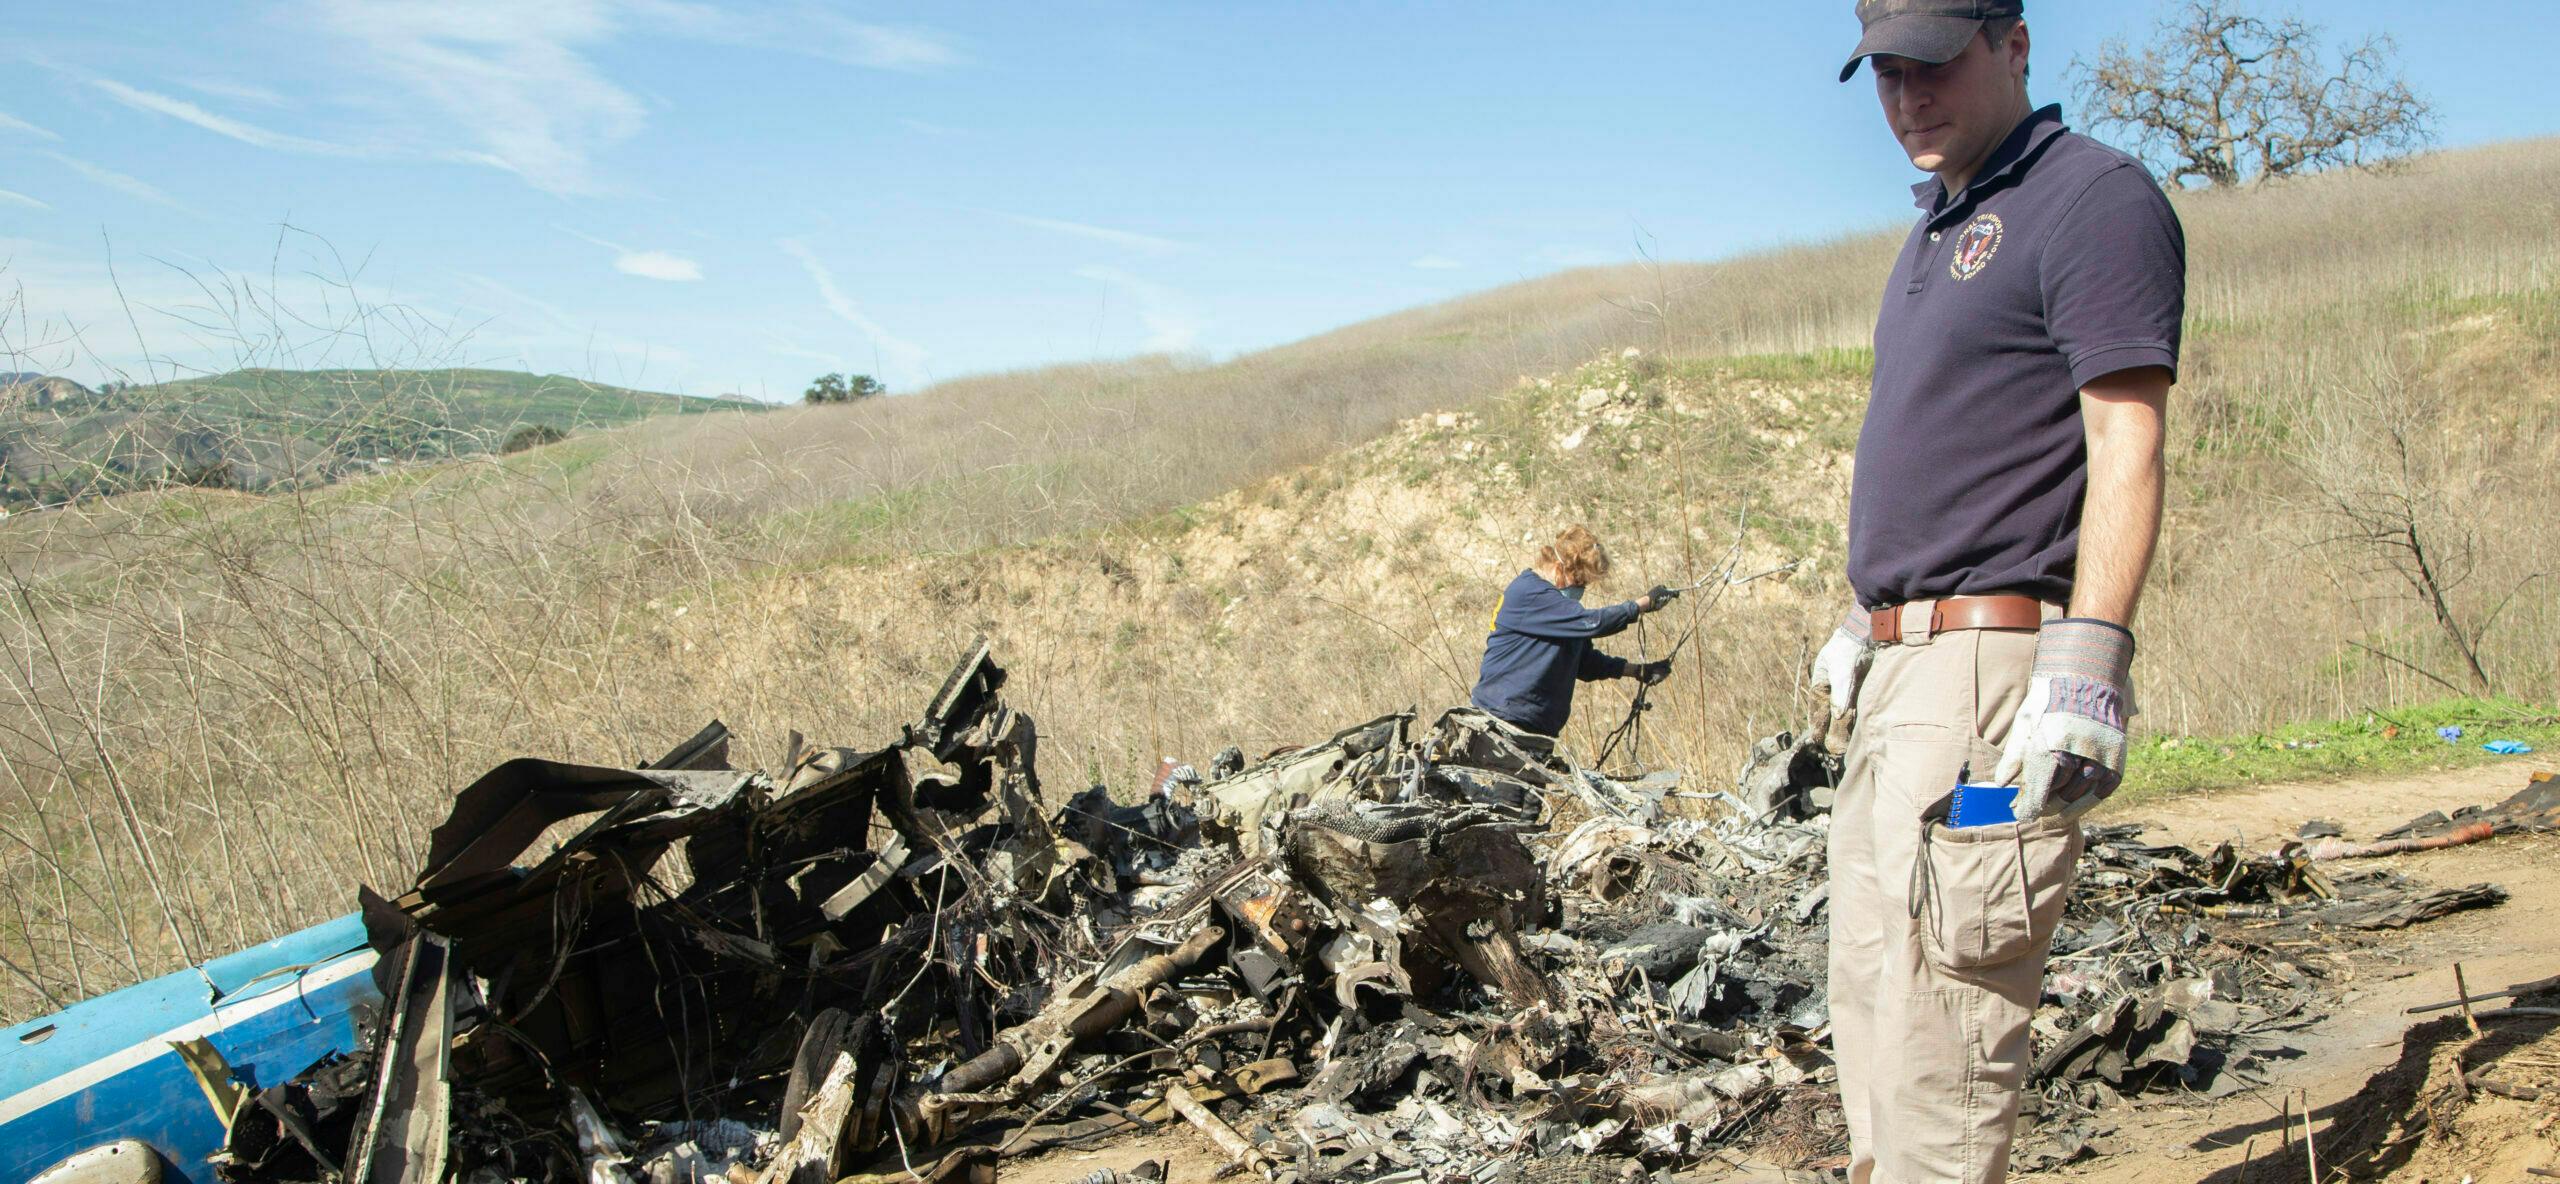 Kobe Bryant Crash: Sports Academy Sues Helicopter Company Over Coaches Death